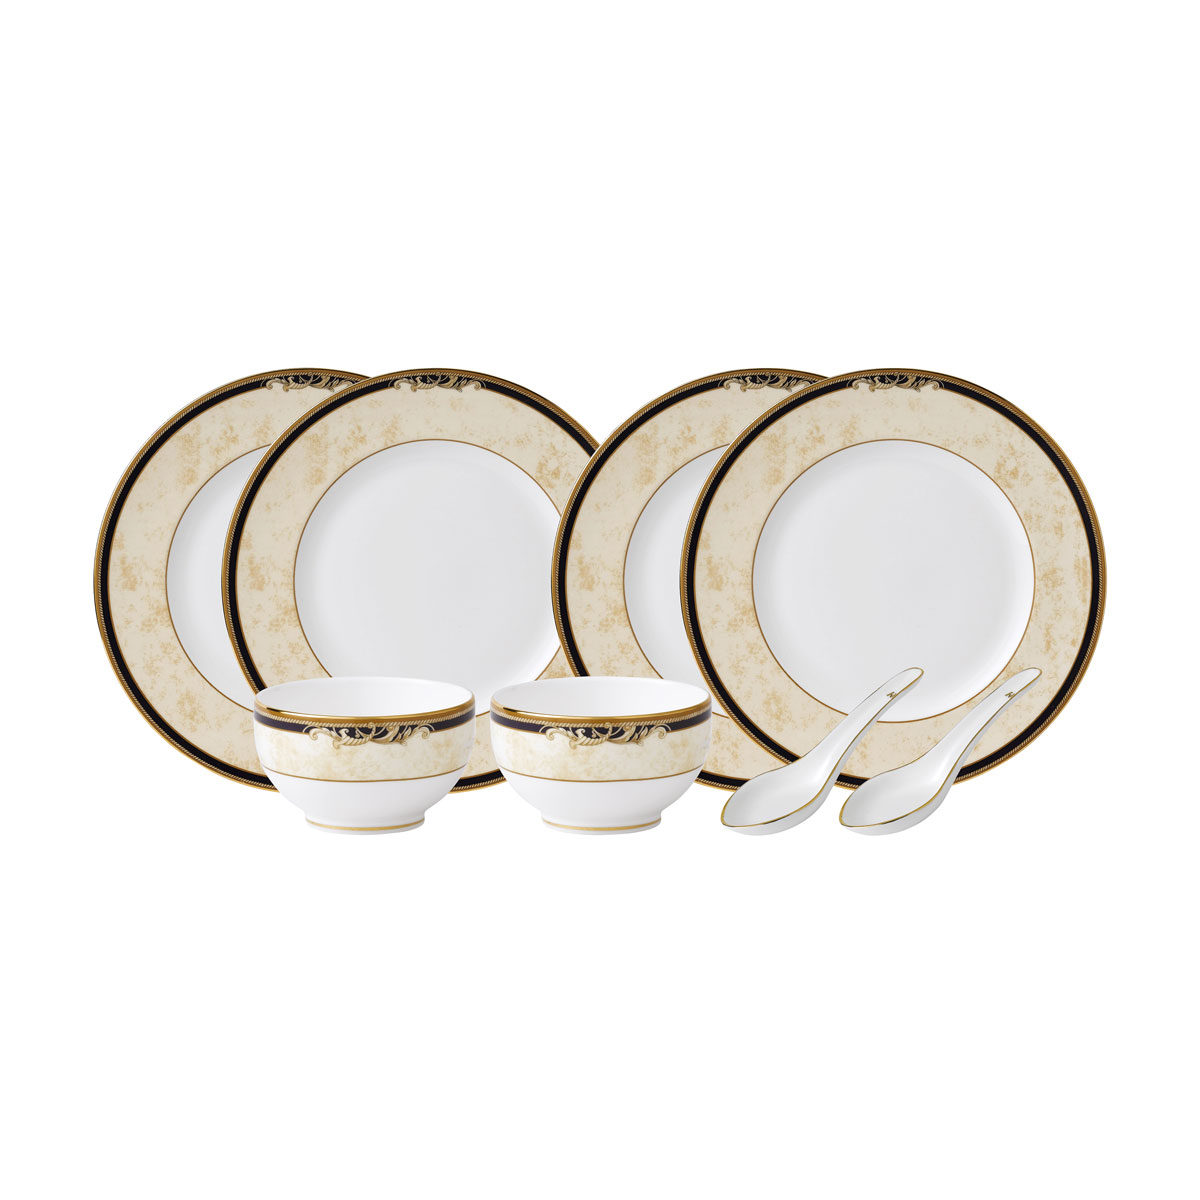 Wedgwood Cornucopia Dining Set For Two With Spoons